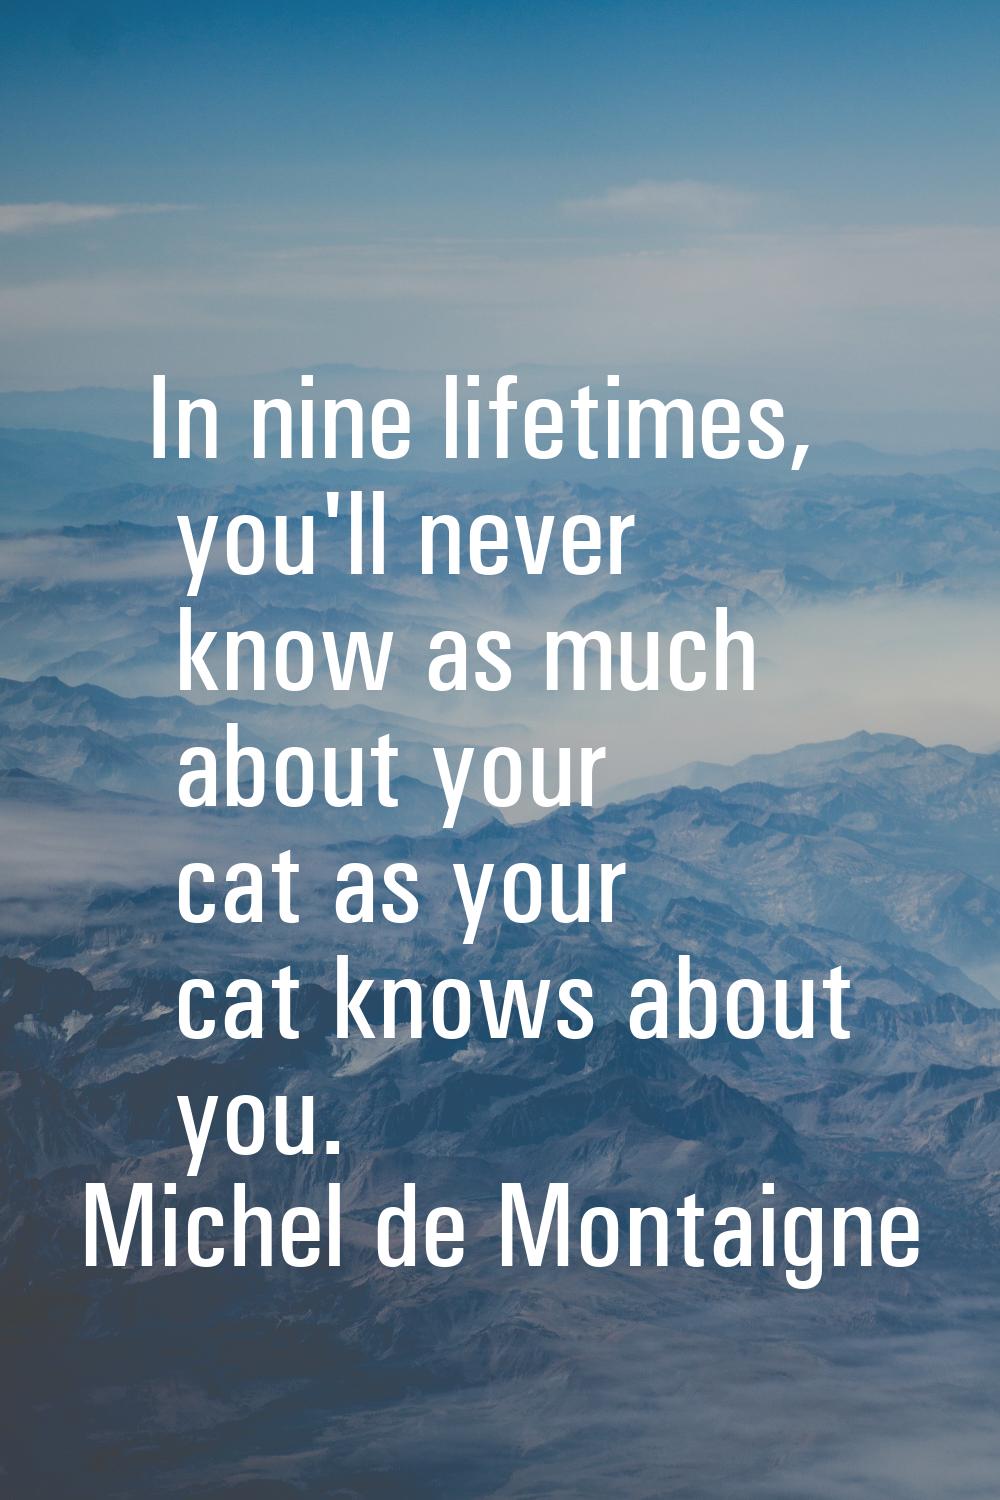 In nine lifetimes, you'll never know as much about your cat as your cat knows about you.